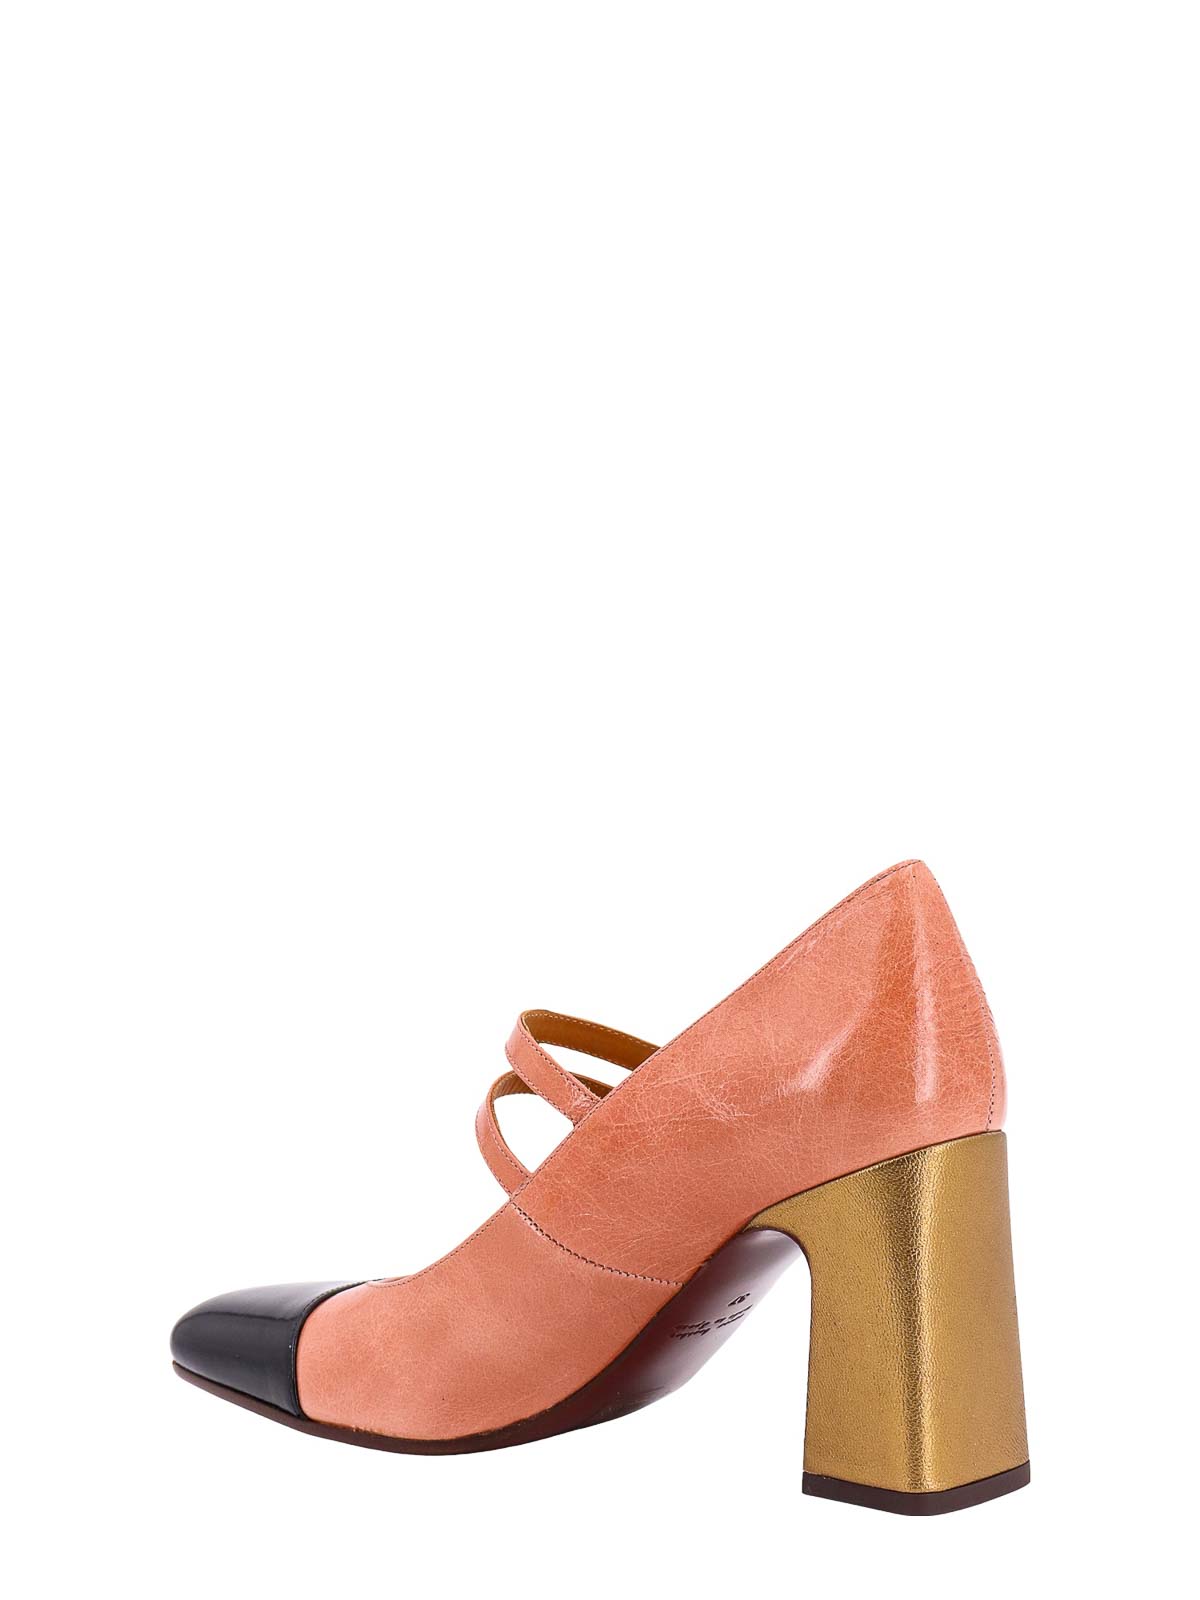 Shop Chie Mihara Patent Leather Dcollet In Orange